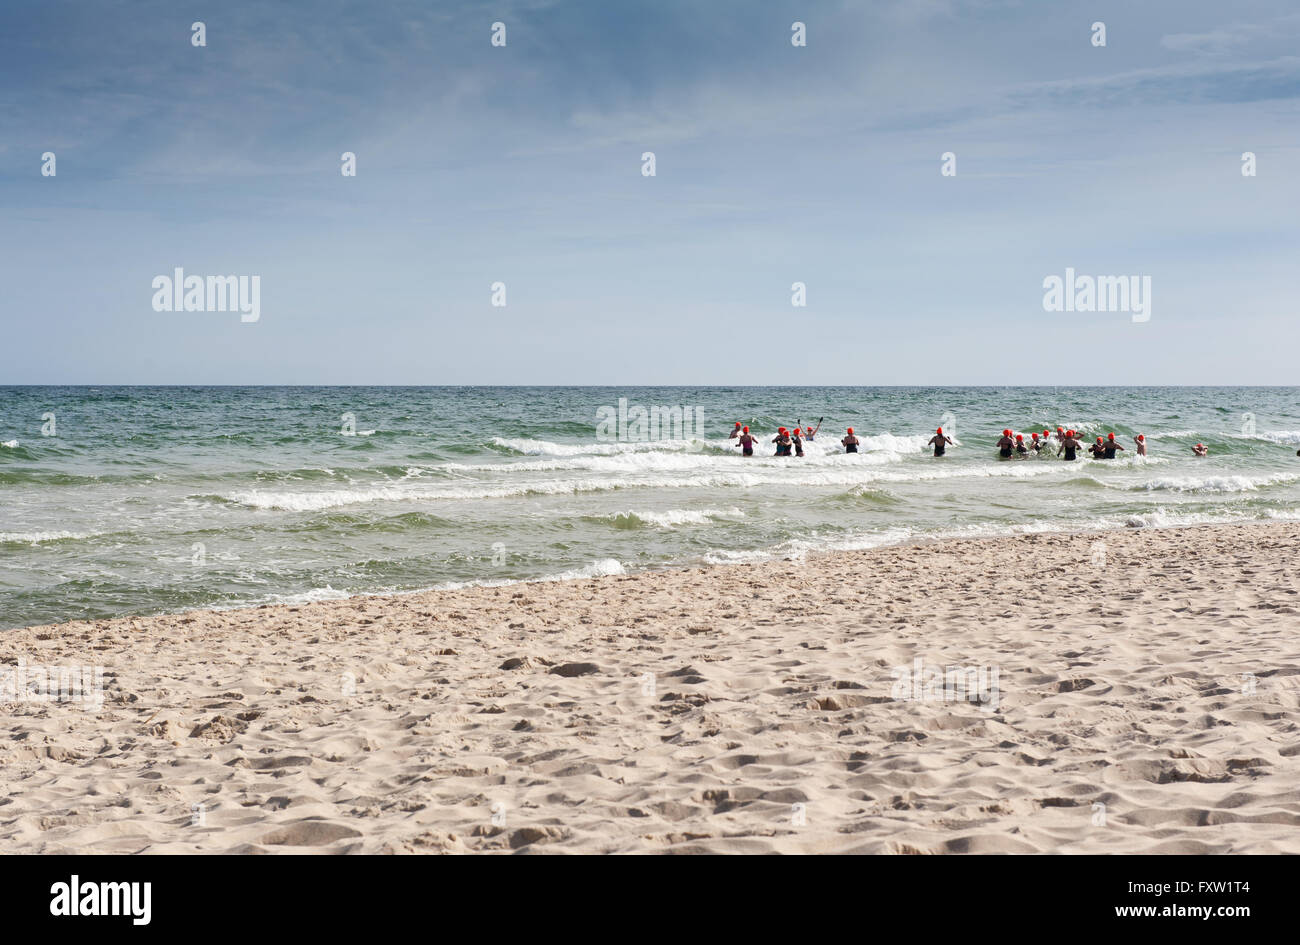 Winter swimmers in sea water in Wladyslawowo seashore, Poland, Europe, people during refreshing active sport on the Baltic Sea Stock Photo